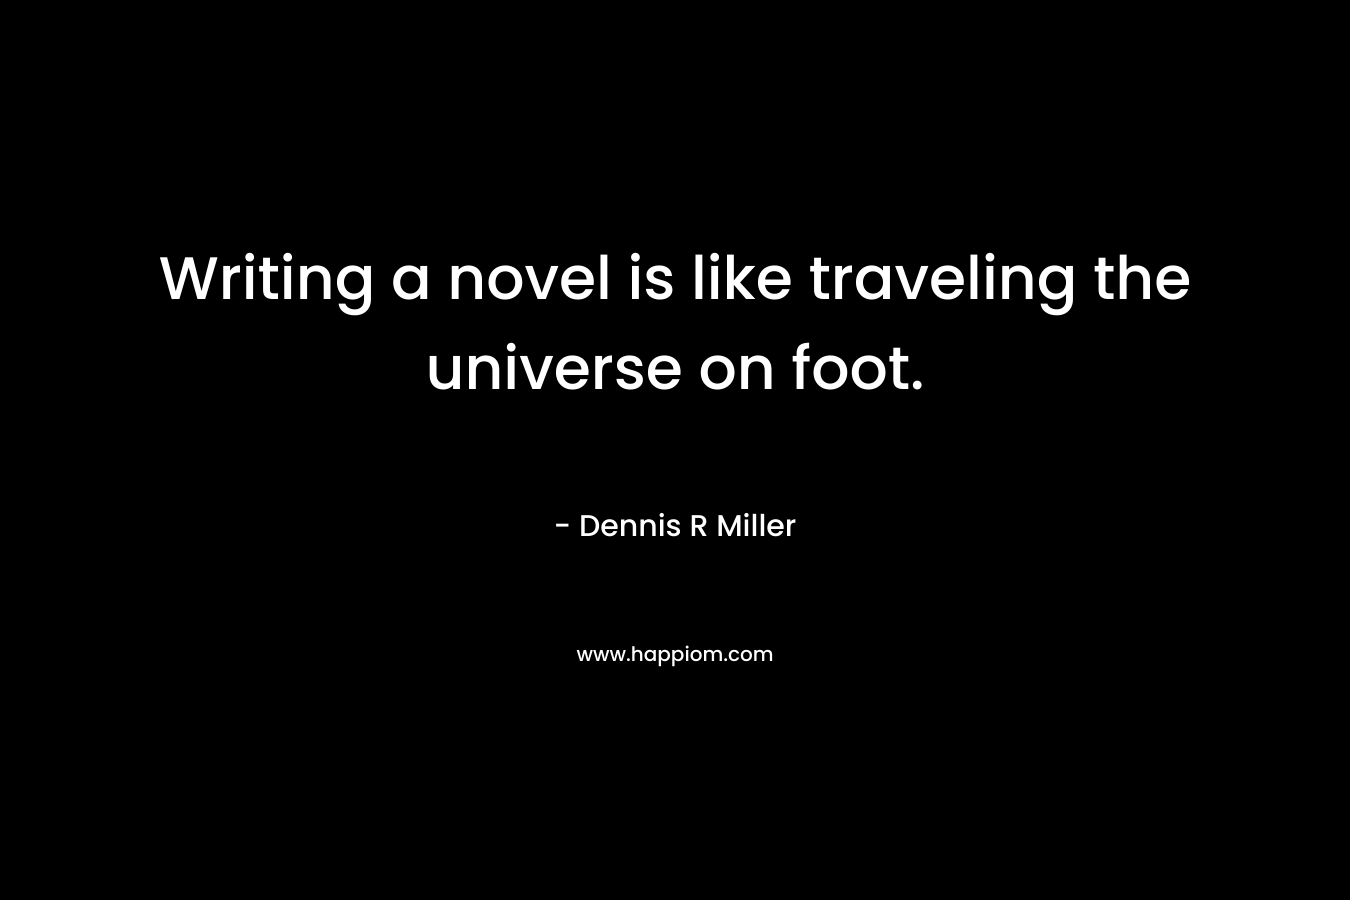 Writing a novel is like traveling the universe on foot. – Dennis R Miller